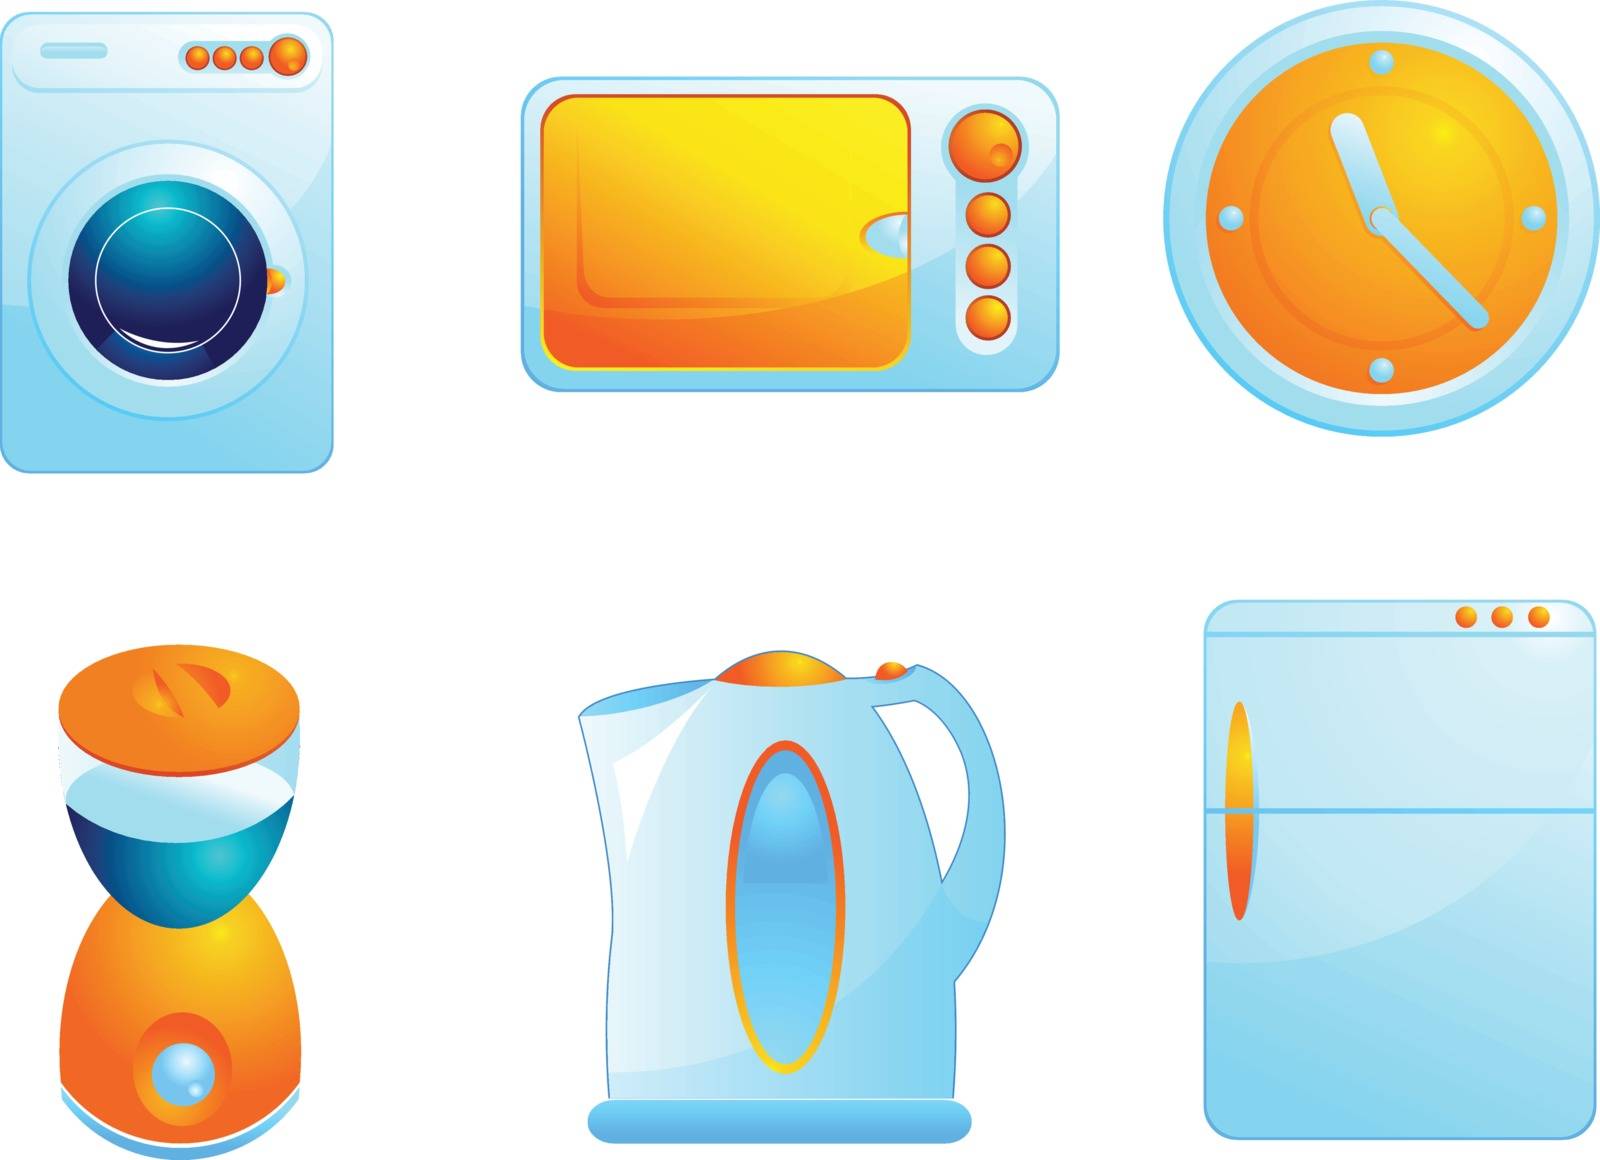 Home equipment icons by ayax